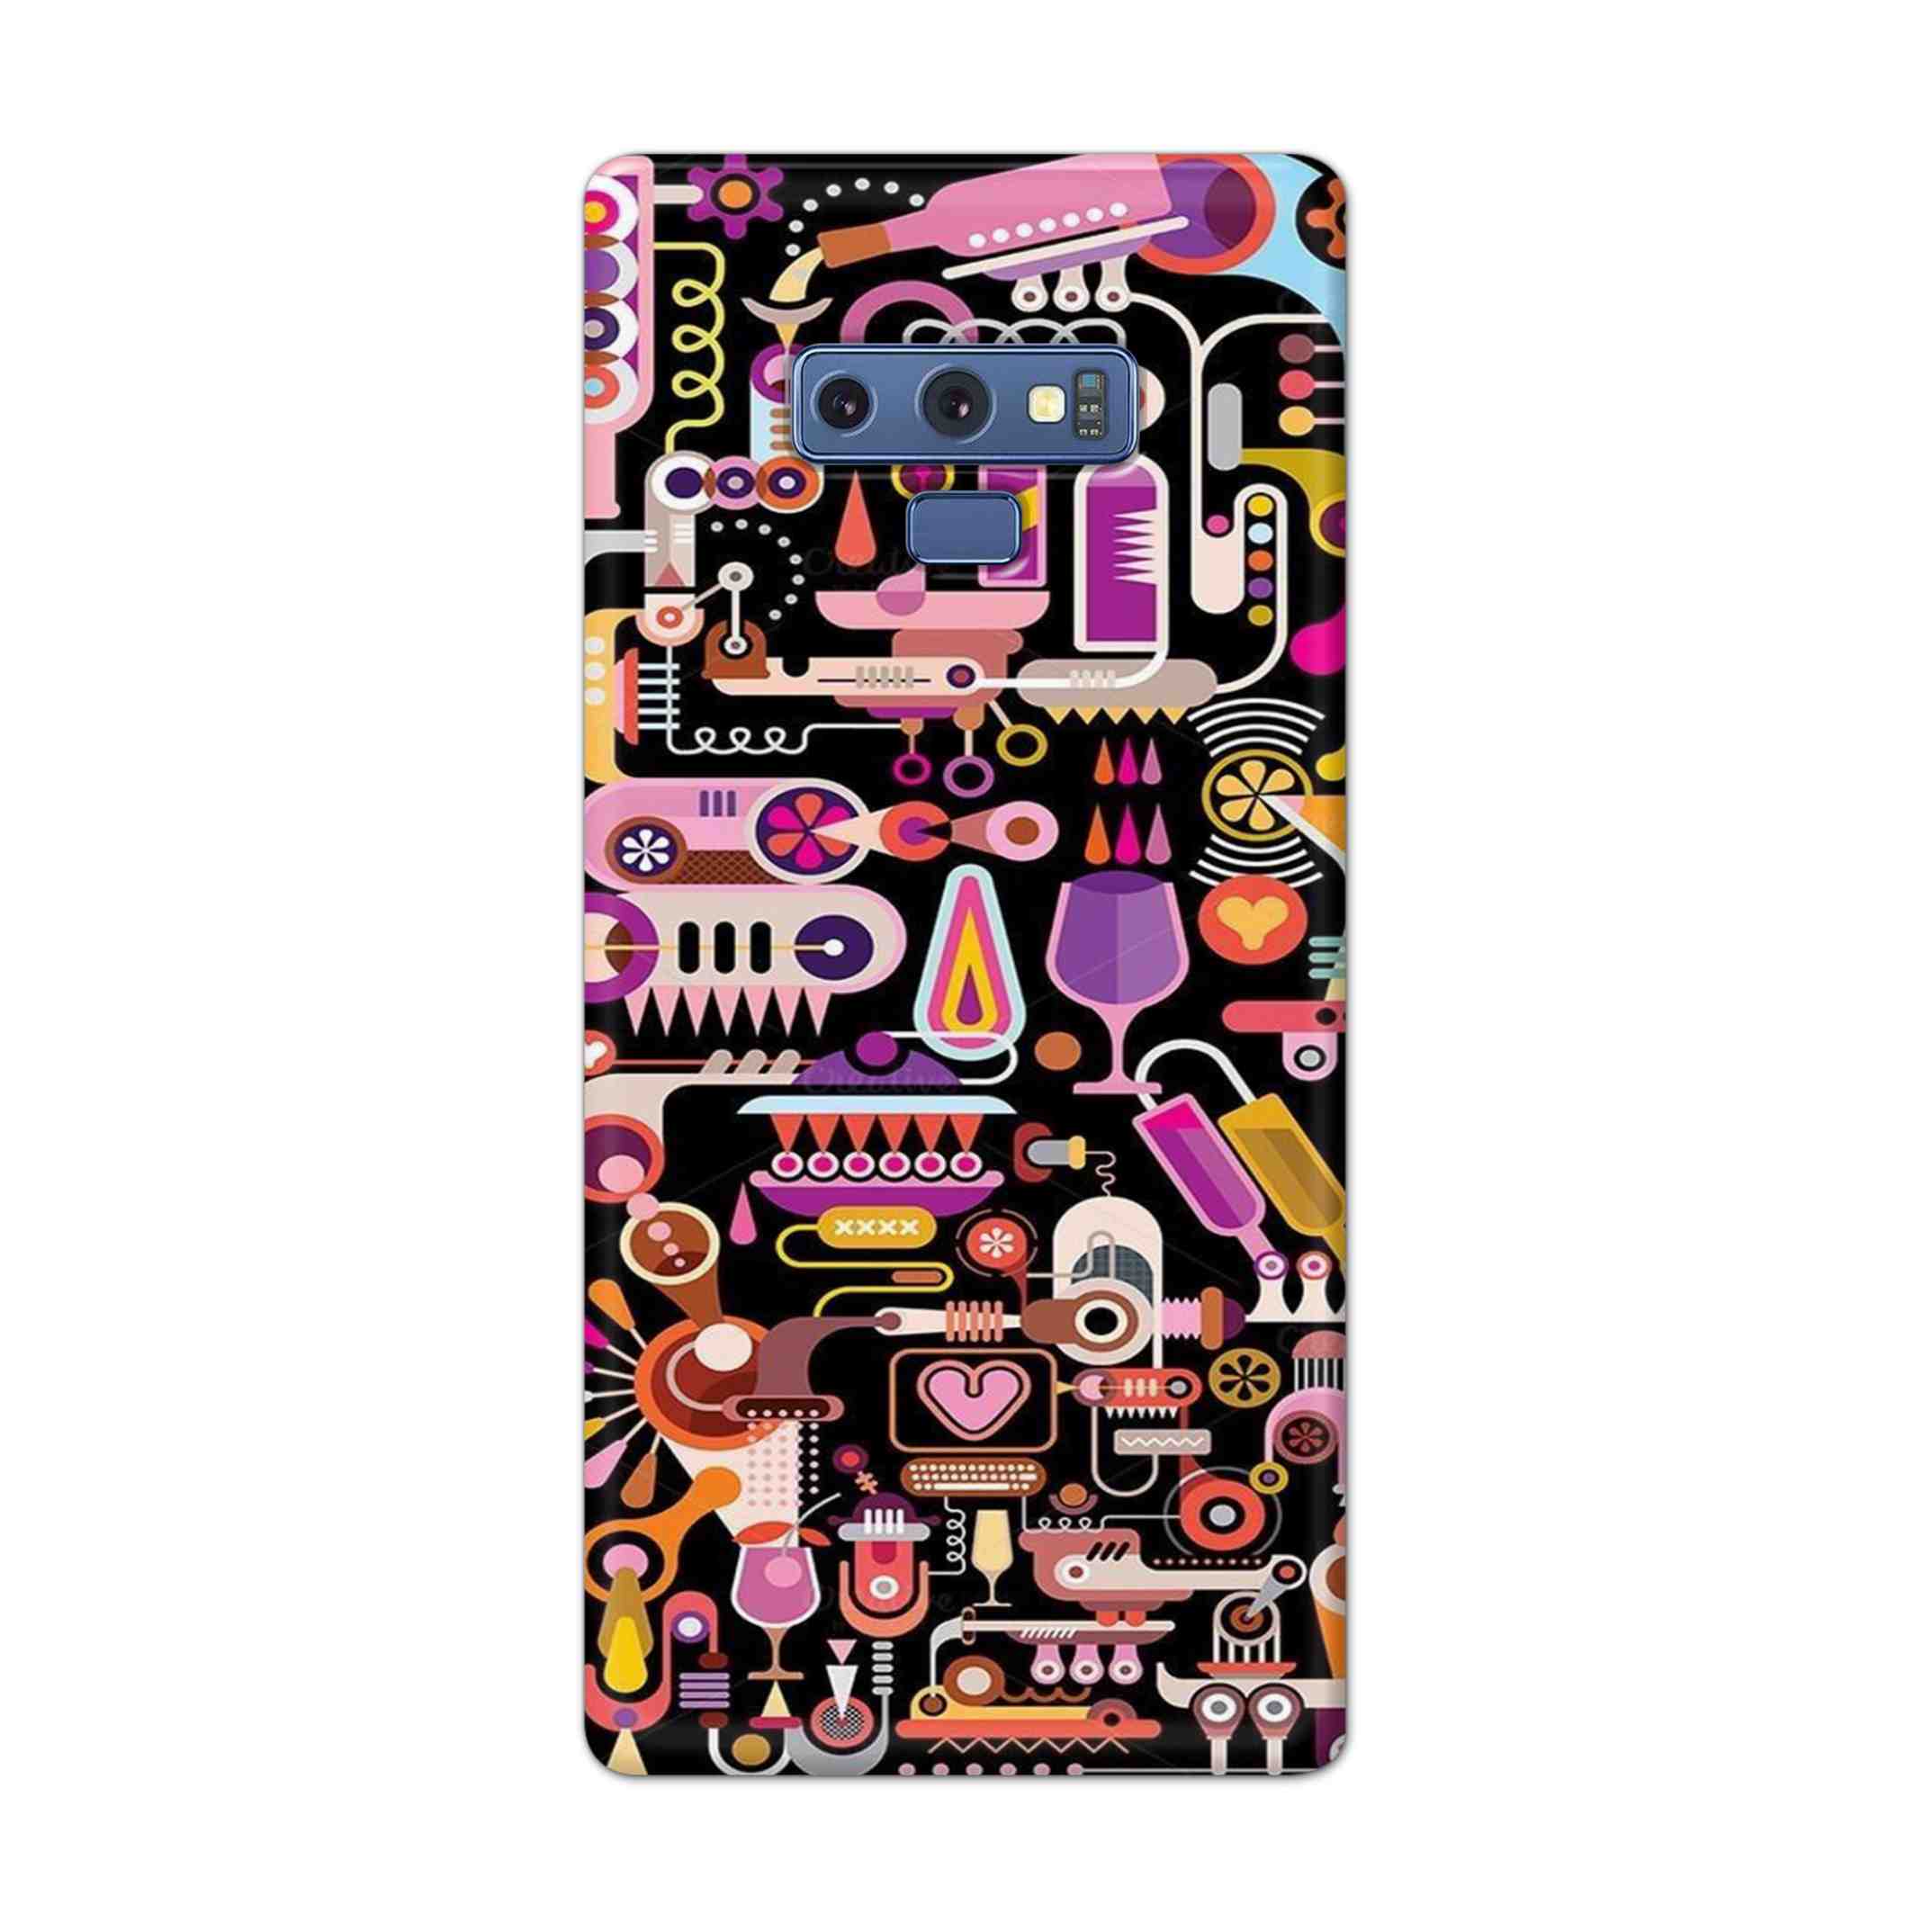 Buy Lab Art Hard Back Mobile Phone Case Cover For Samsung Galaxy Note 9 Online